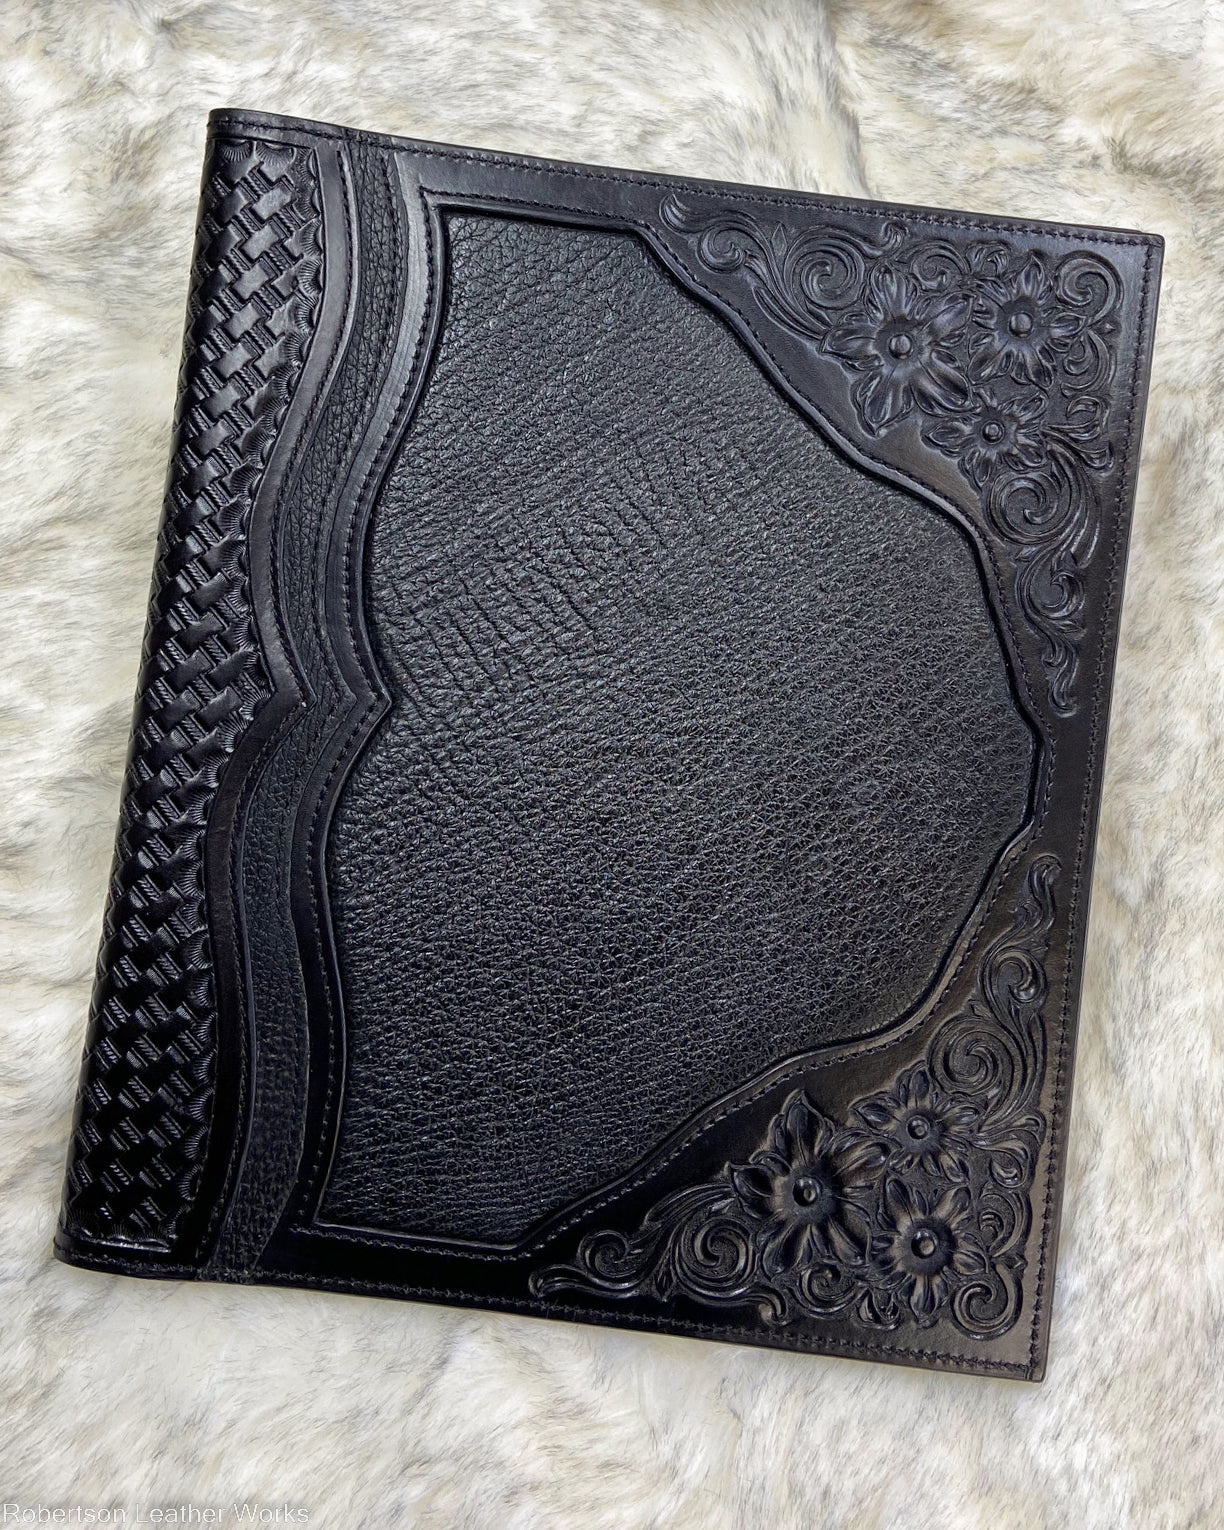 Black Floral with Shark Inlay Legal Pad Cover